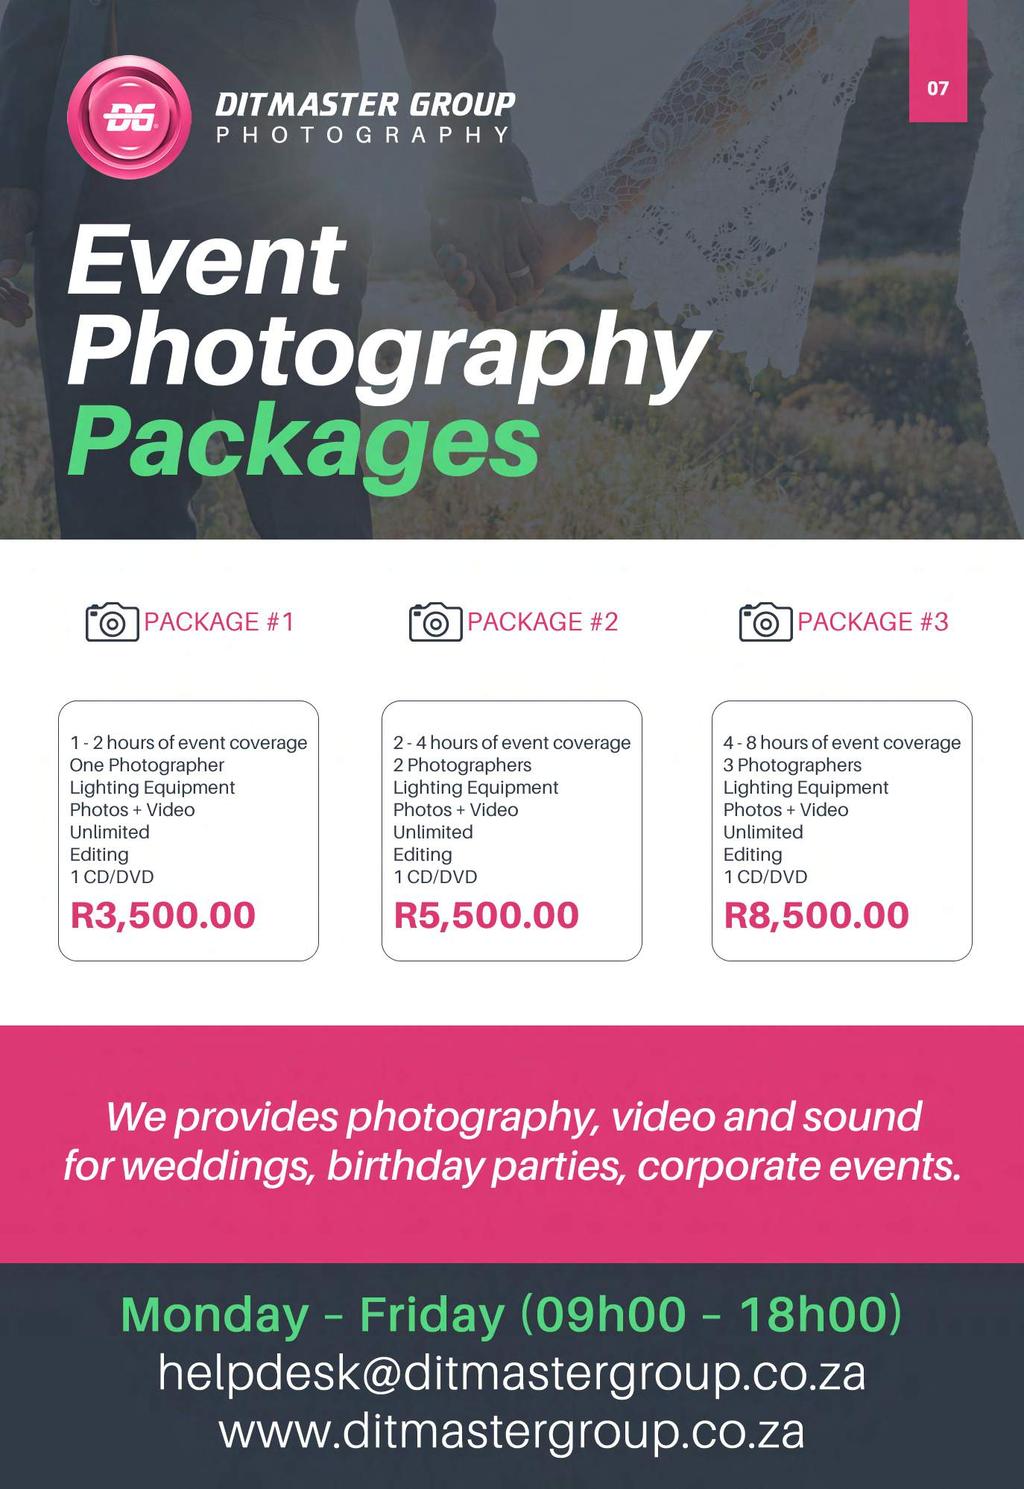 D I T M A S T E R G R O U P P H O T O G R A P H Y 07 Event Photography Packages PACKAGE #1 PACKAGE #2 PACKAGE #3 1-2hoursofeventcoverage OnePhotographer LightingEquipment Photos+Video Unlimited